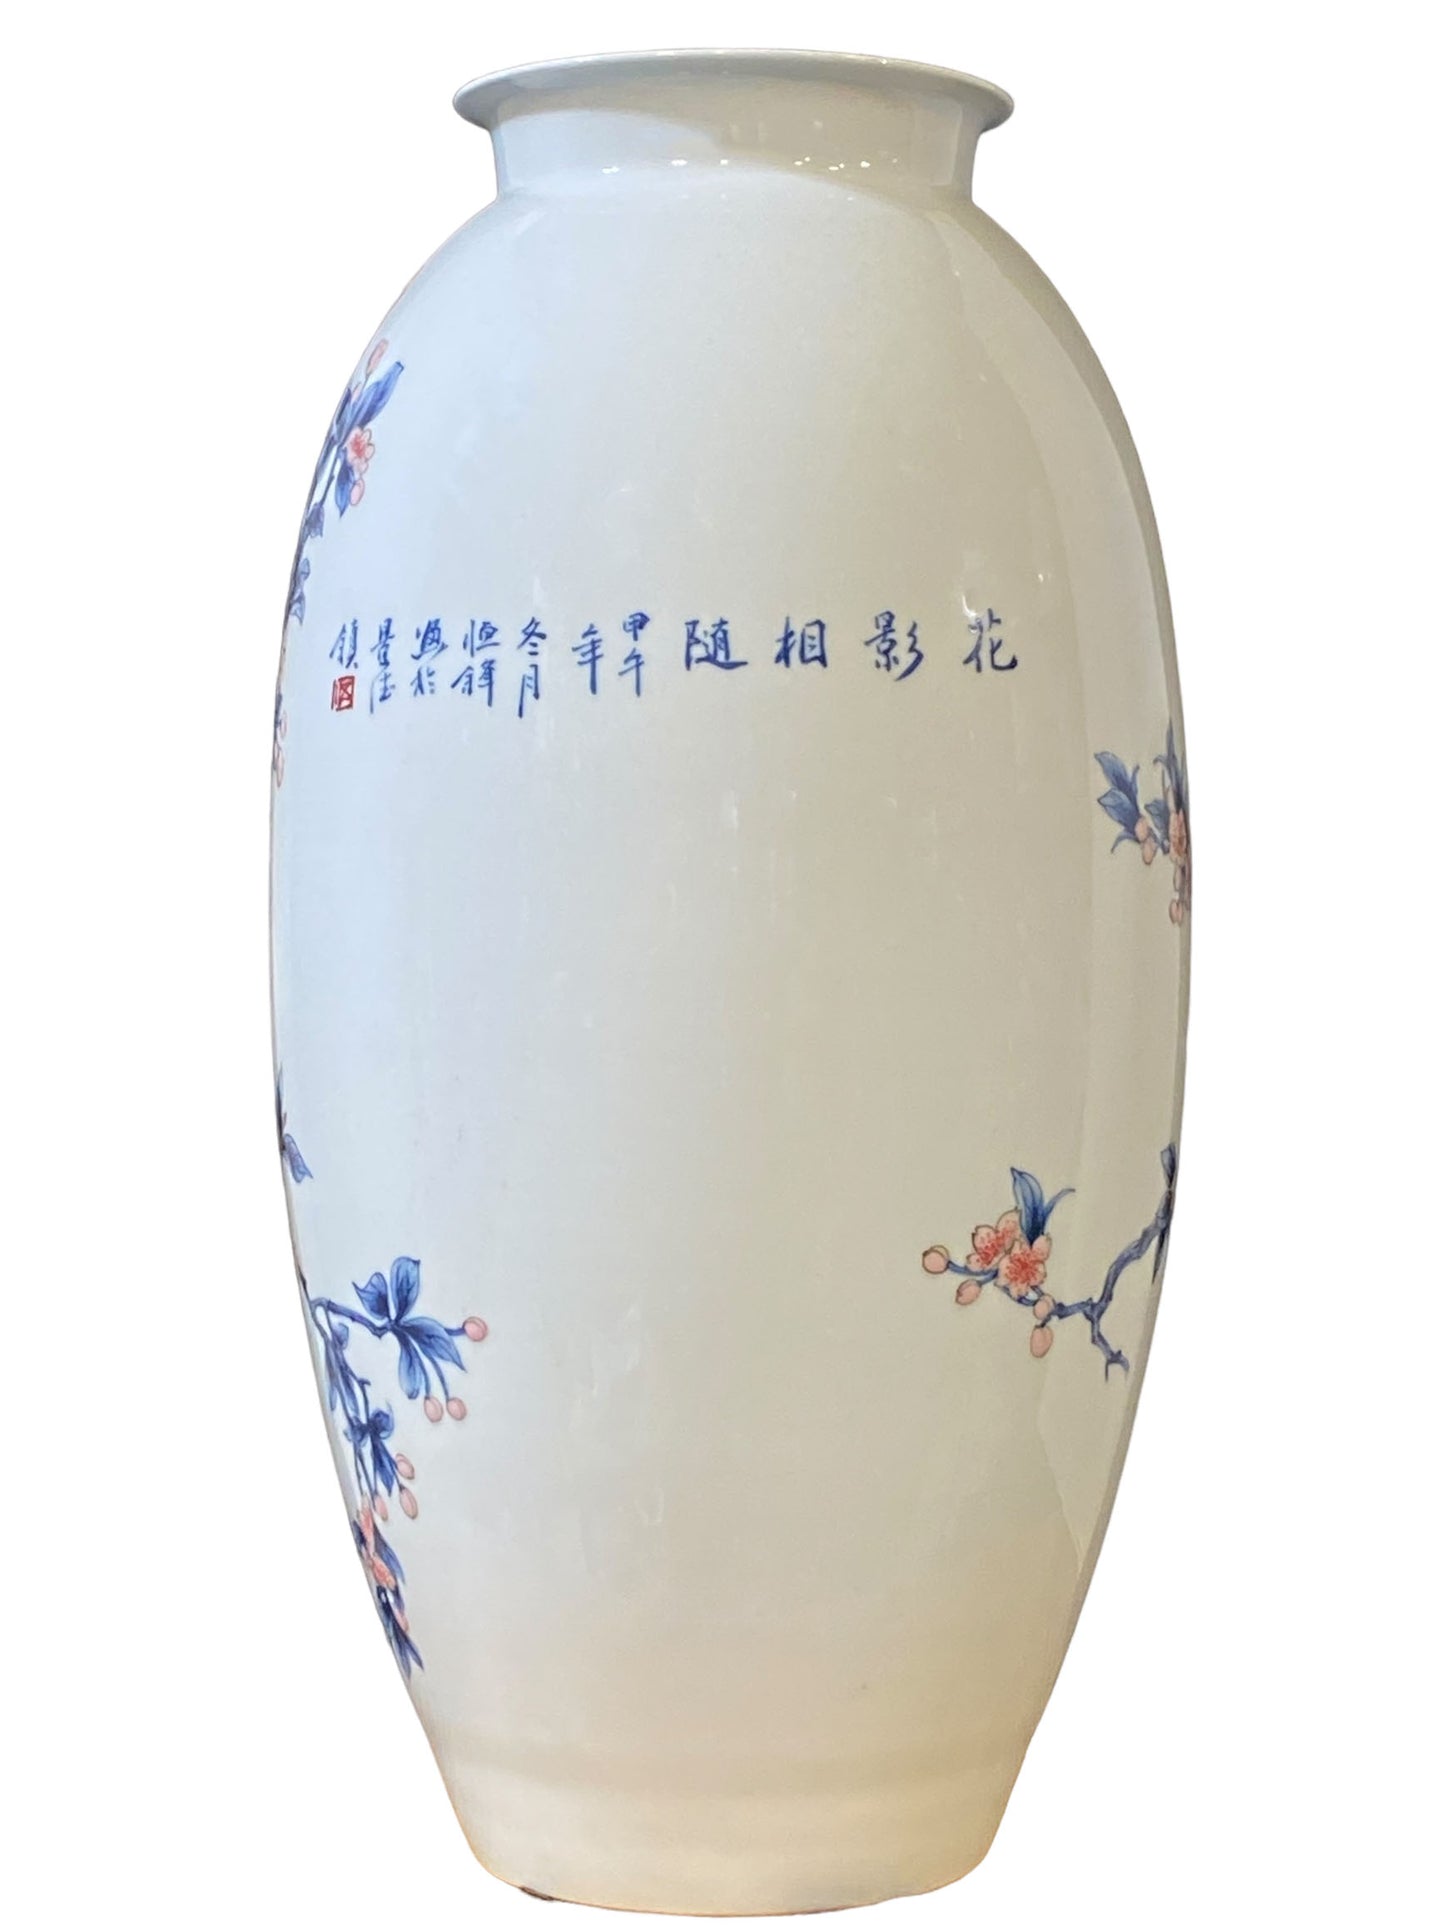 #2350 Stunning Chinese Blue& white Porcelain Hand-Painted Vase  23' H